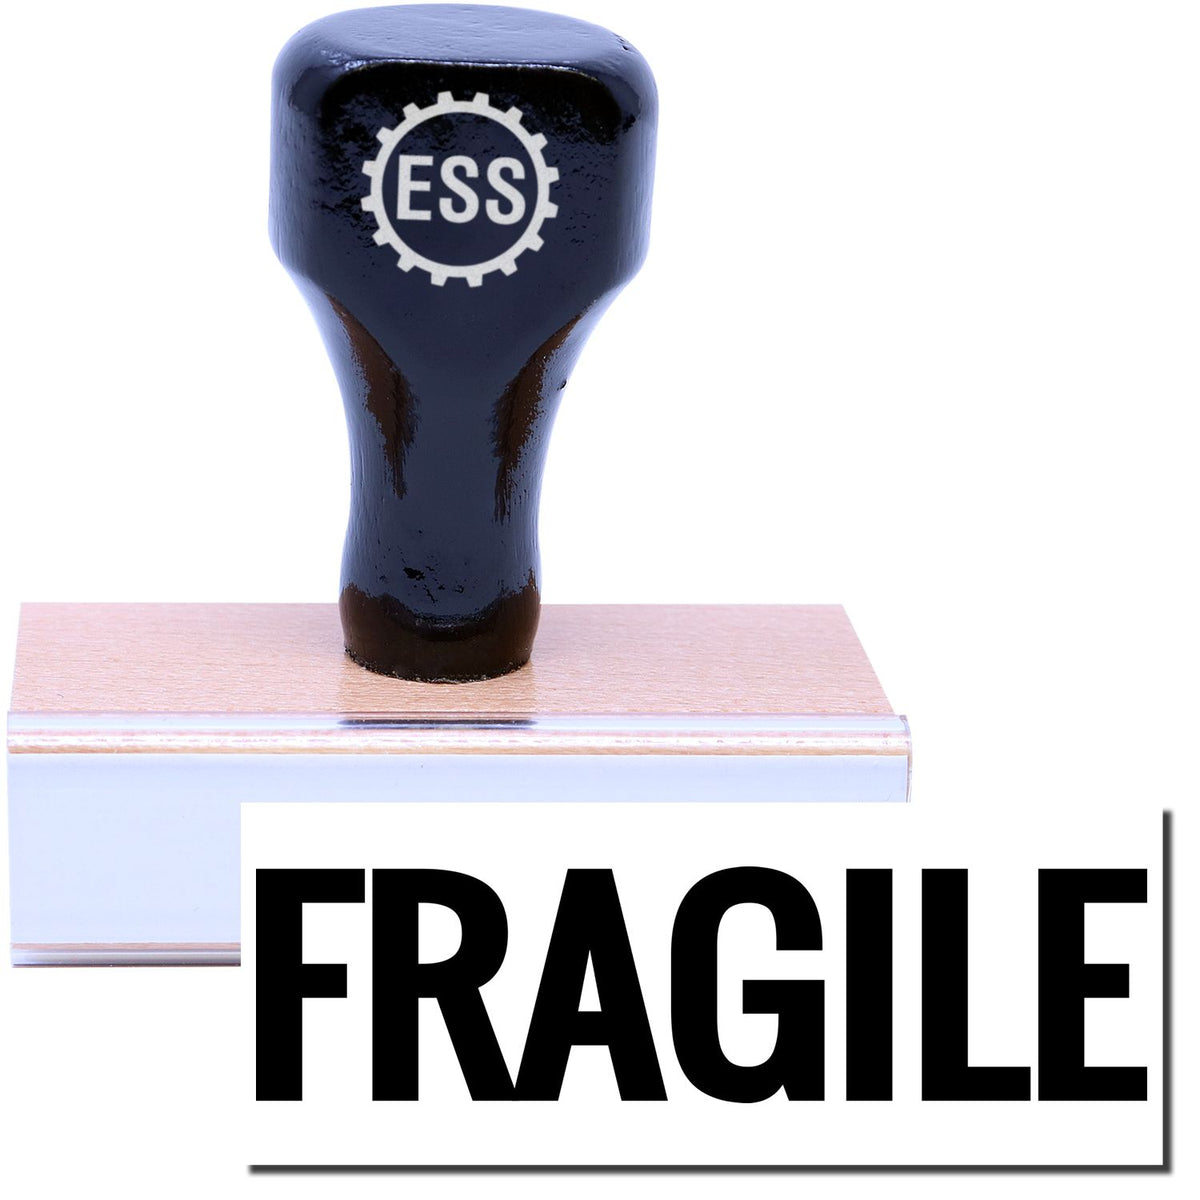 A stock office rubber stamp with a stamped image showing how the text &quot;FRAGILE&quot; in a large bold font is displayed after stamping.